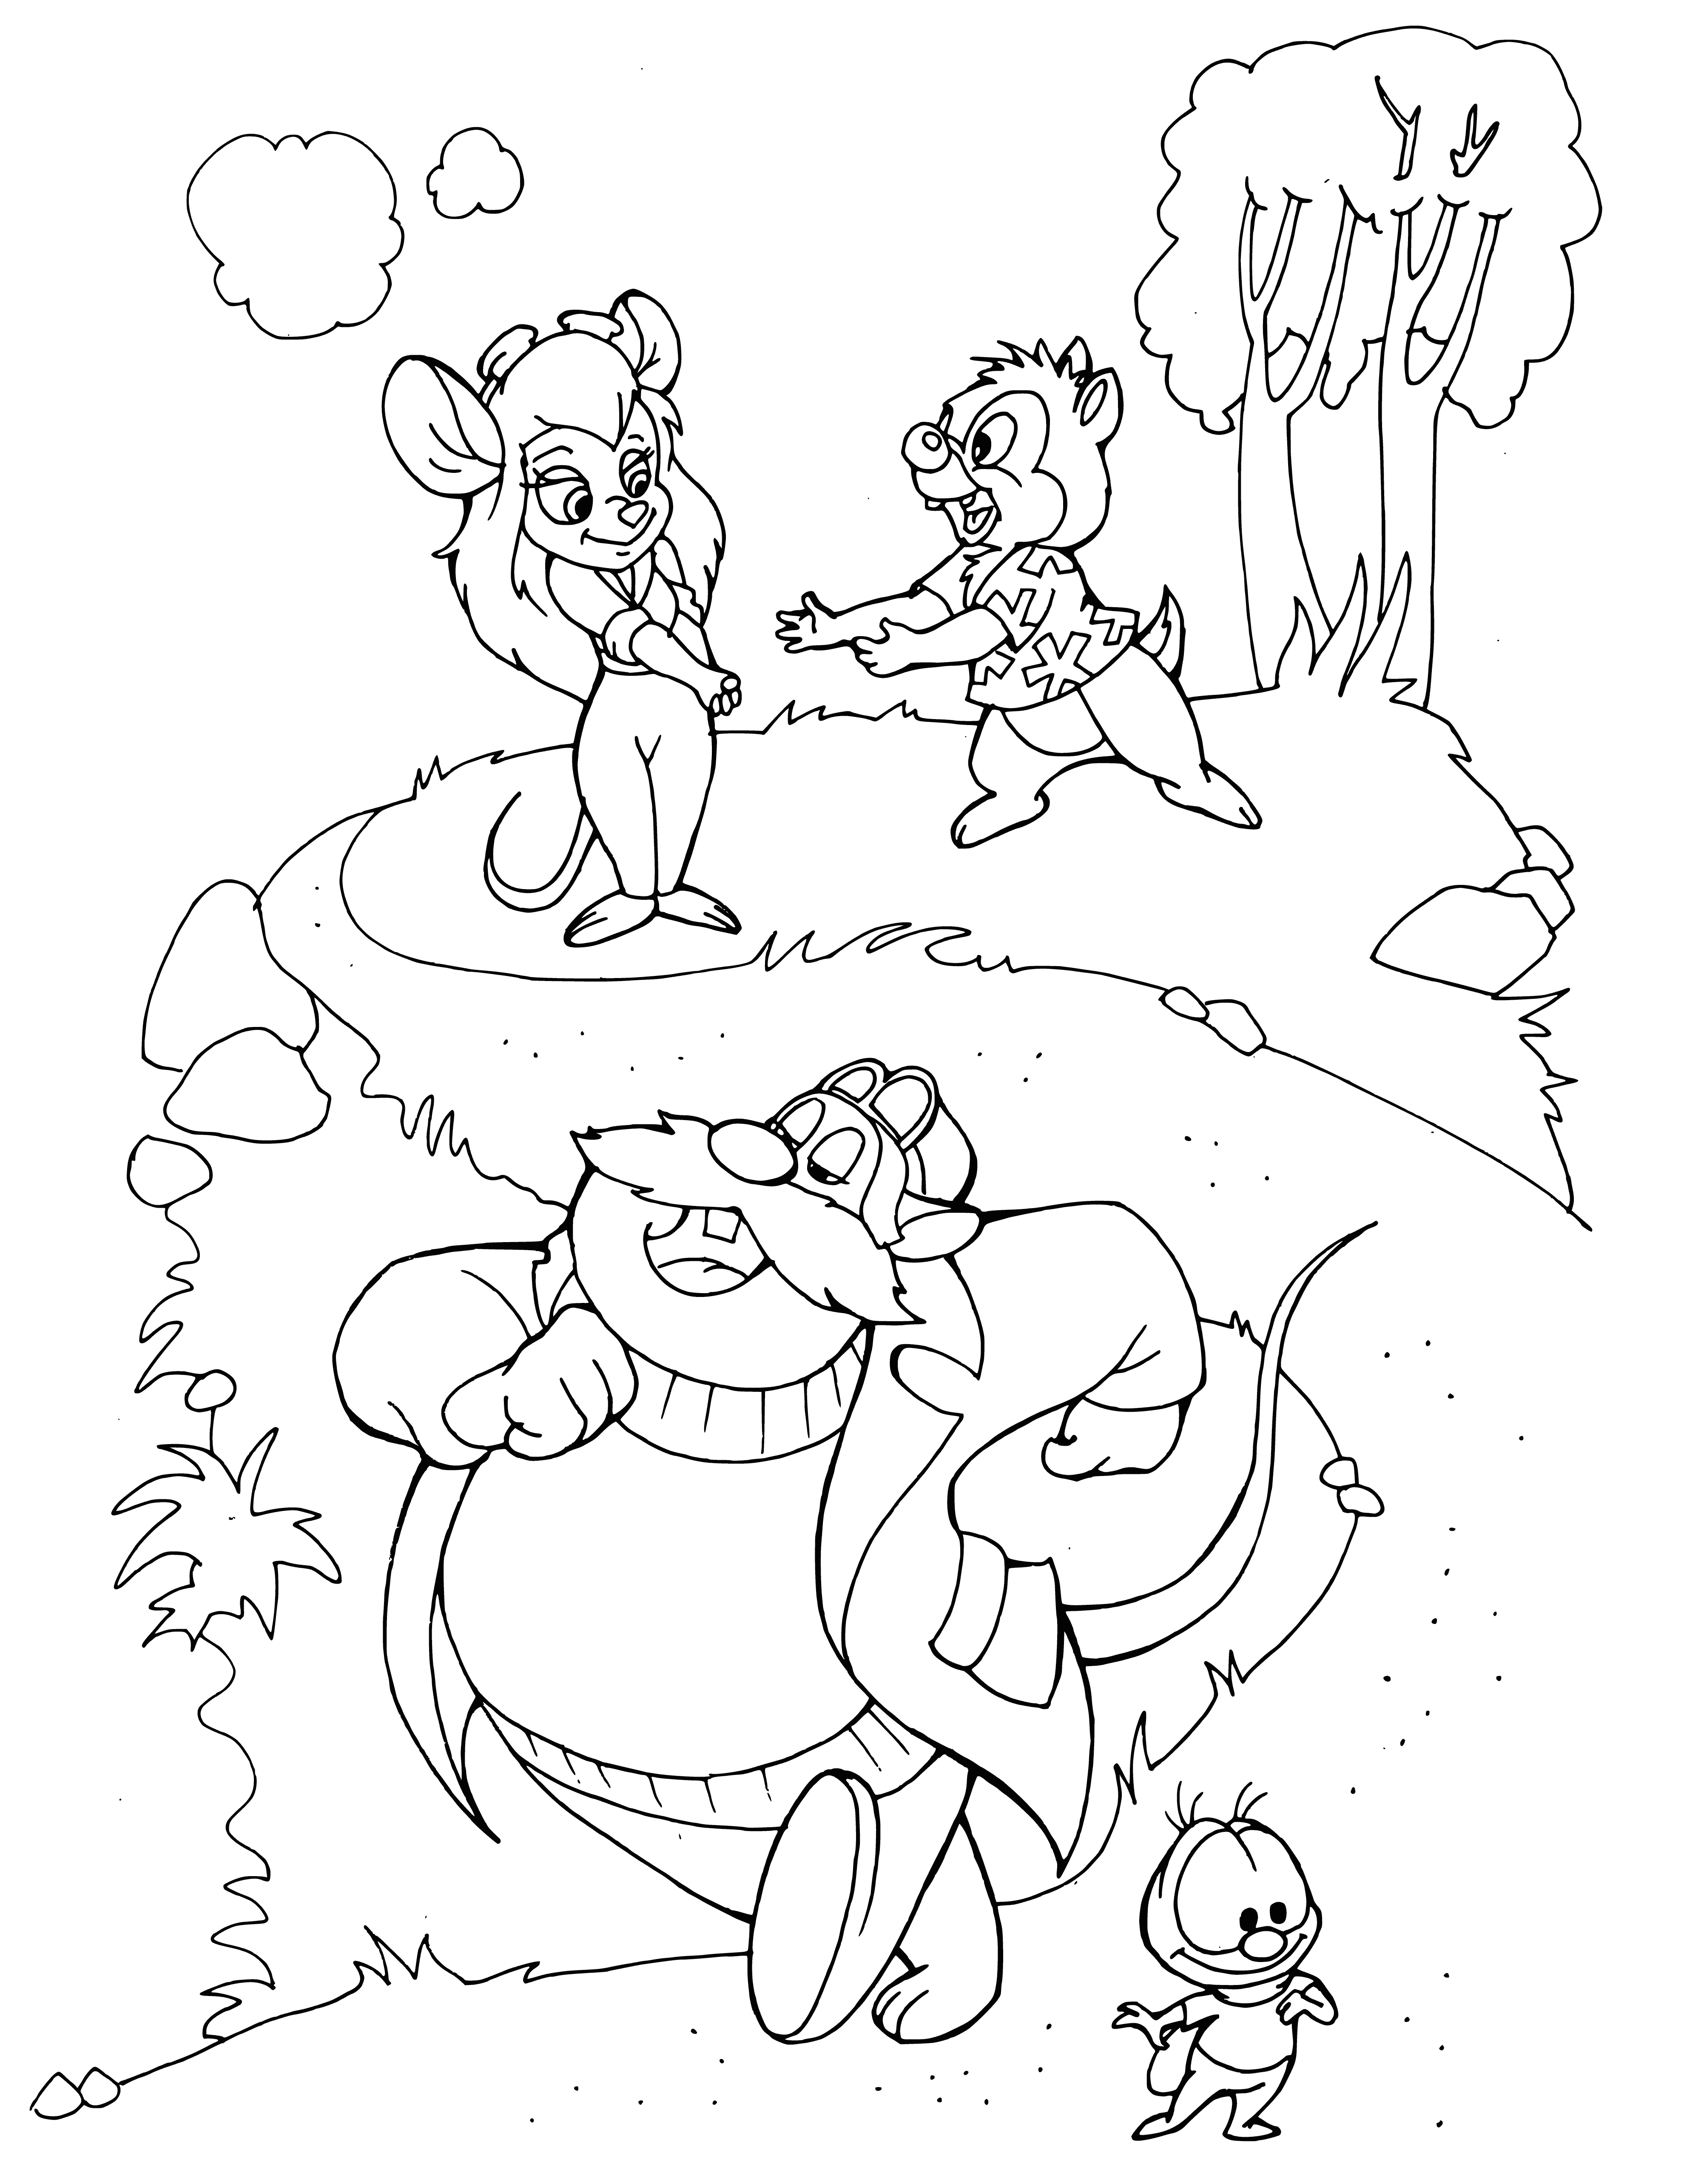 Nut, Dale, Roquefort and Vzhik coloring page